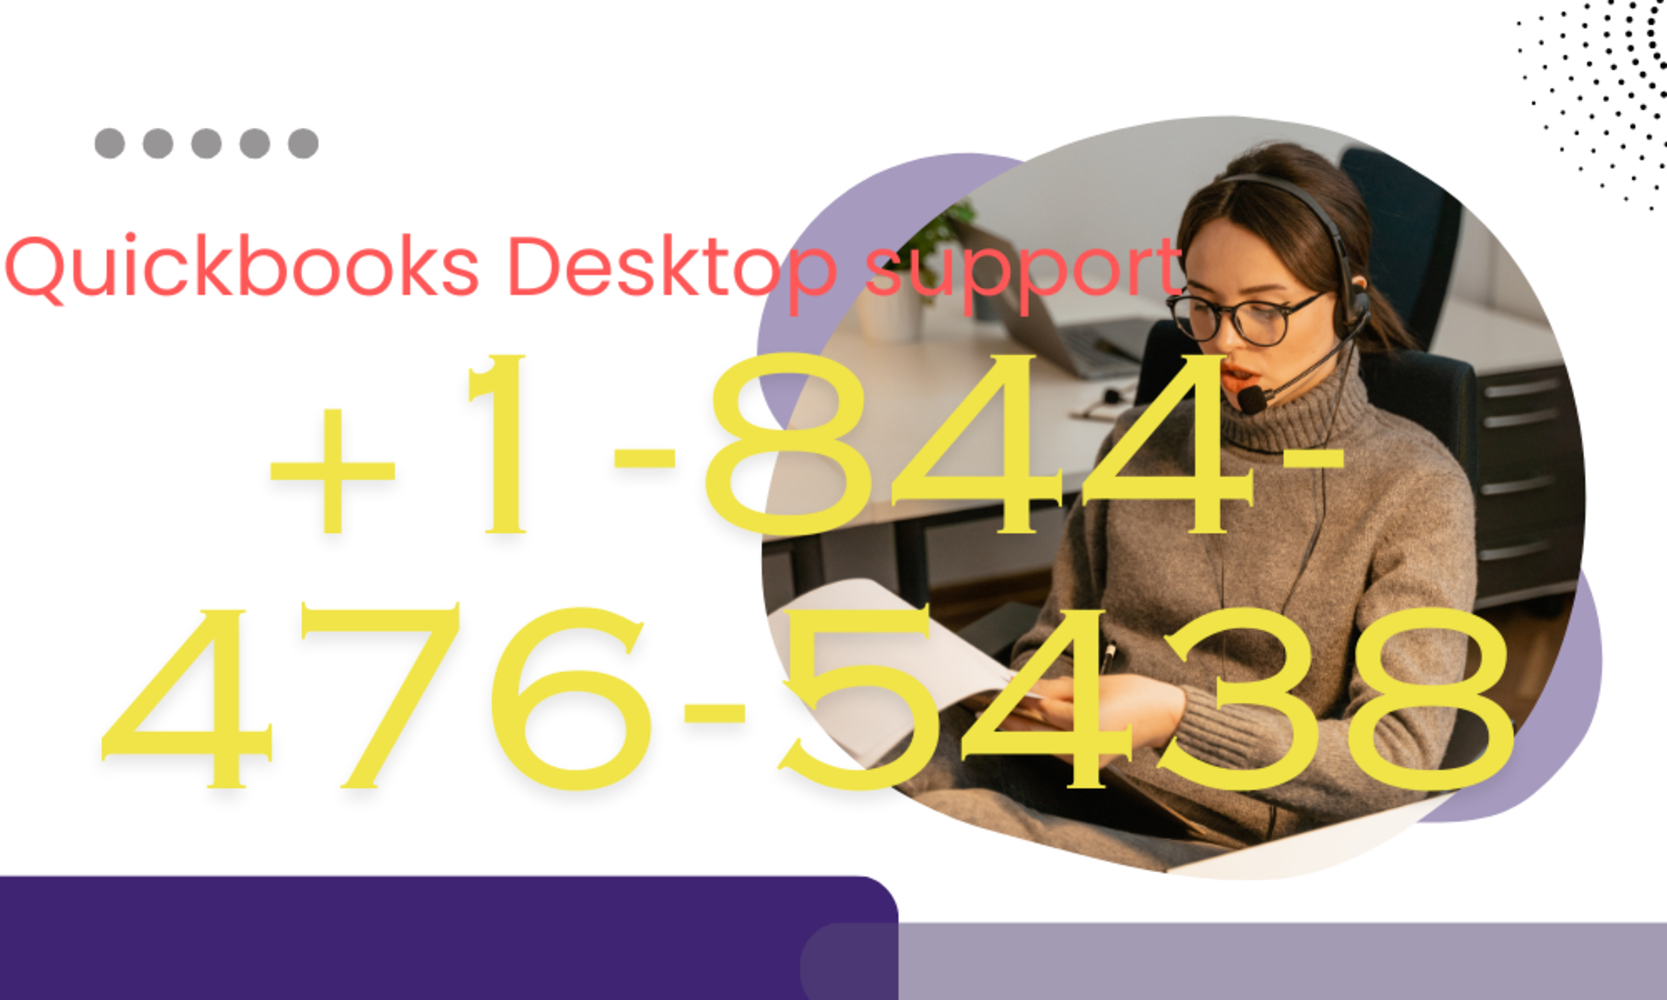 QuickBooks Desktop Support ☎️Number ♛Get Helpline Number♛ Avail expert help by dialing @ 1(1-844-476-5438) Quickbooks Enterprise Support, if you’re facing issues in Quickbooks Support phone number.The phone number for QuickBooks Desktop support+1-844-INTUIT +1-844-476-5438.